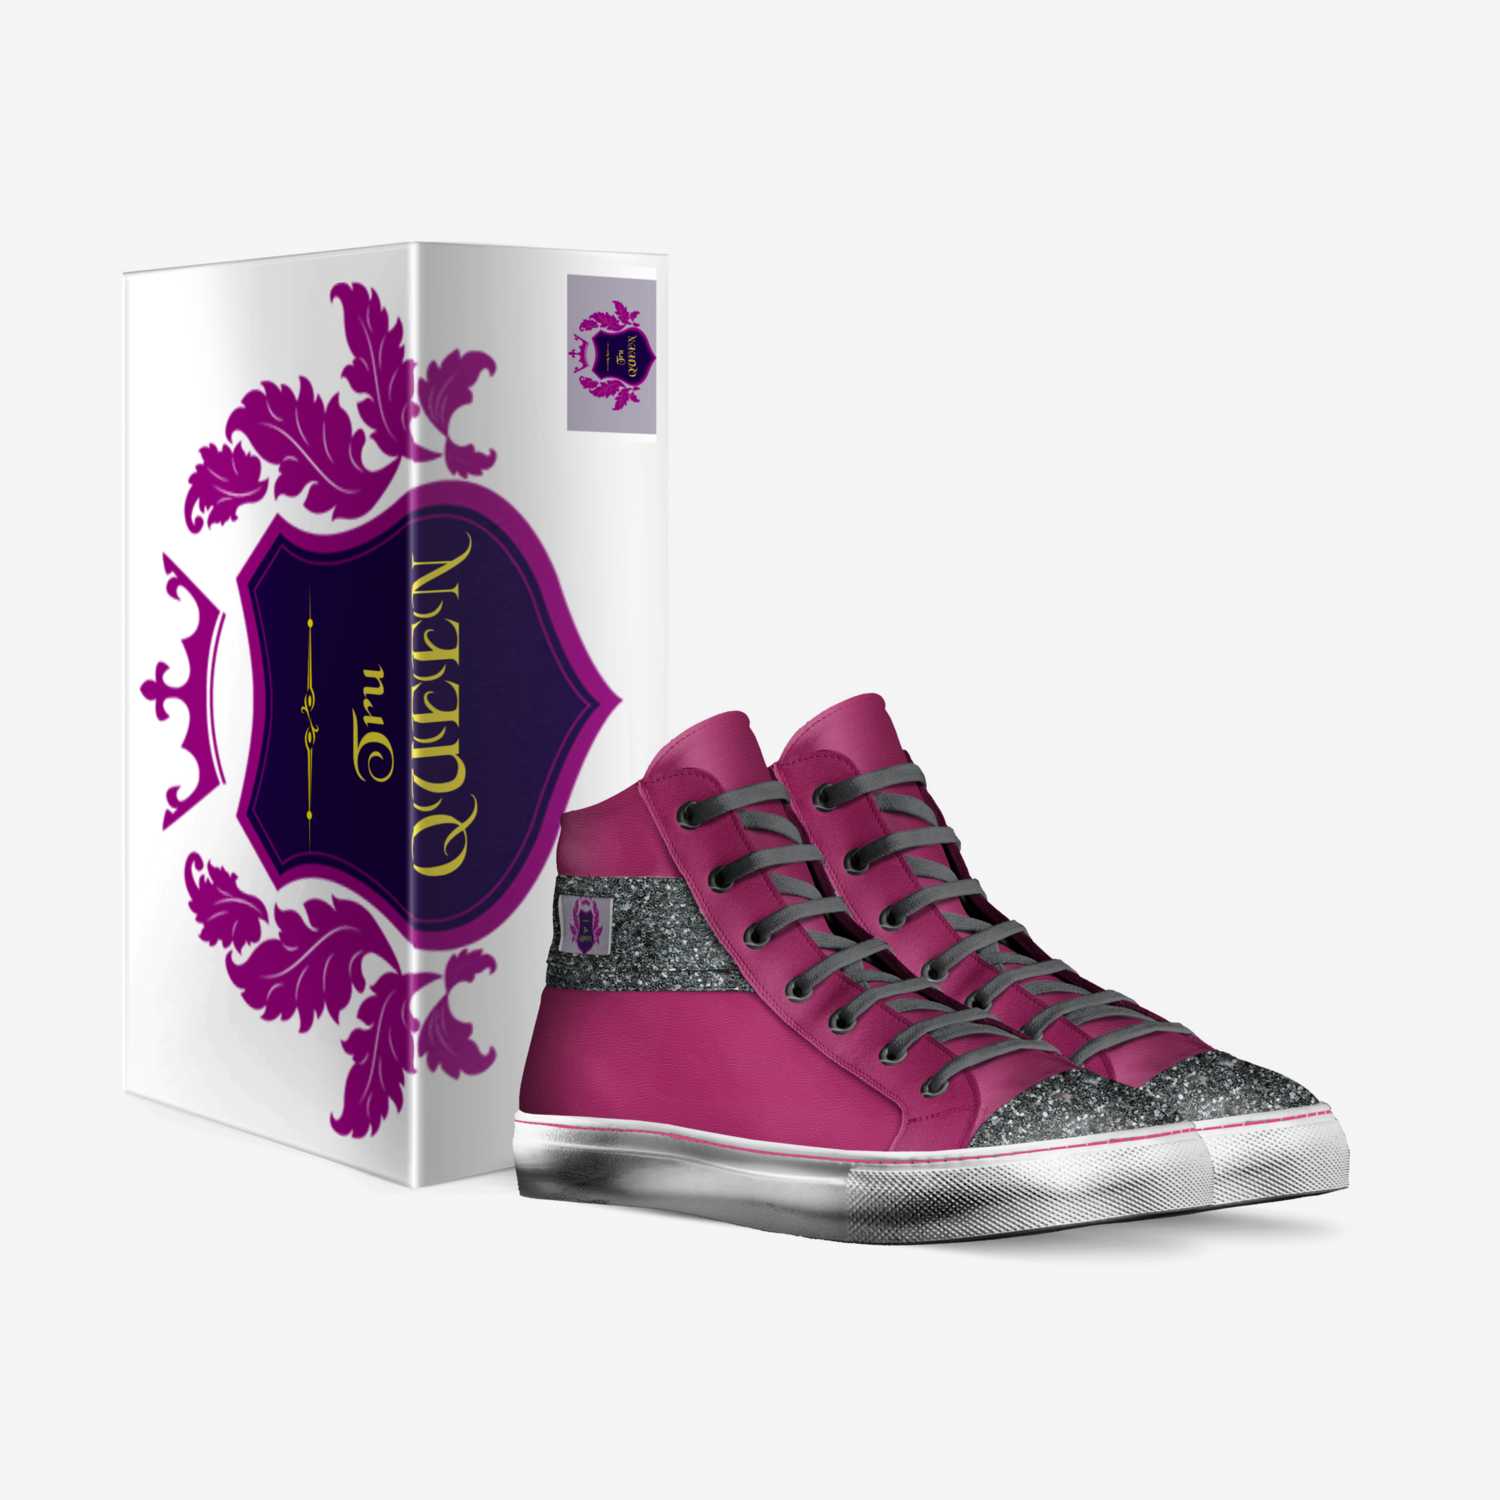 True Queens custom made in Italy shoes by Javorion Coker | Box view